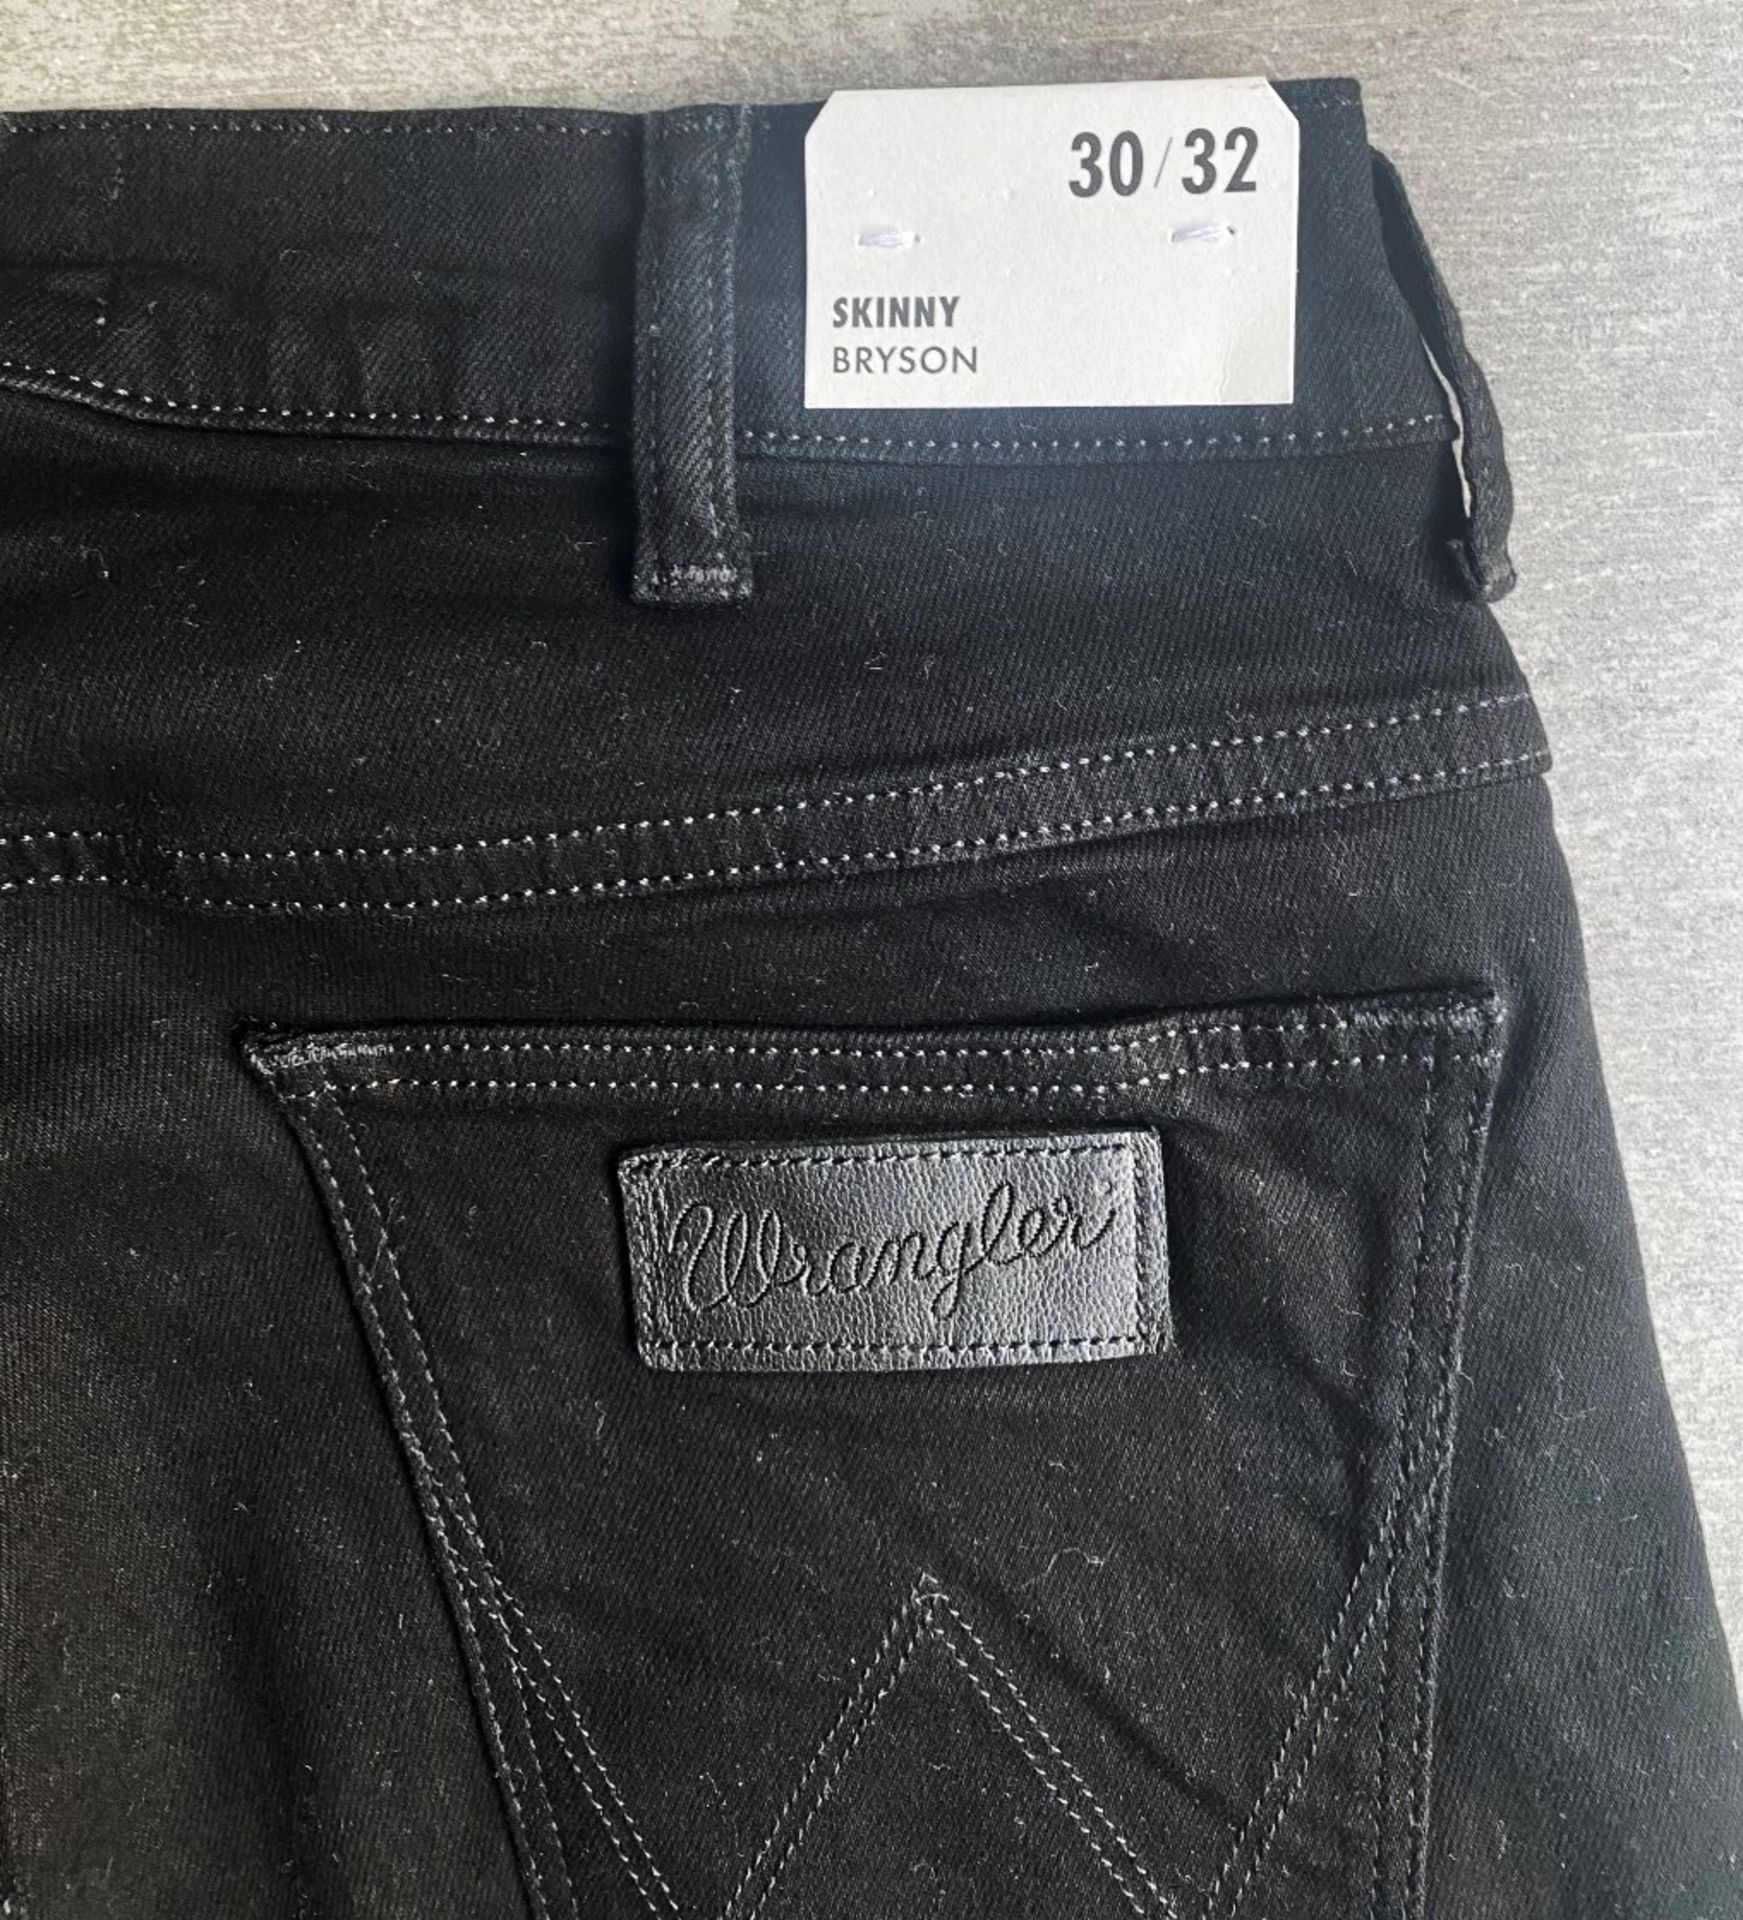 1 x Pair Of Men's Genuine Wrangler Jeans In Black - Size: 30/32 - Preowned, Like New With Tags - - Image 4 of 10